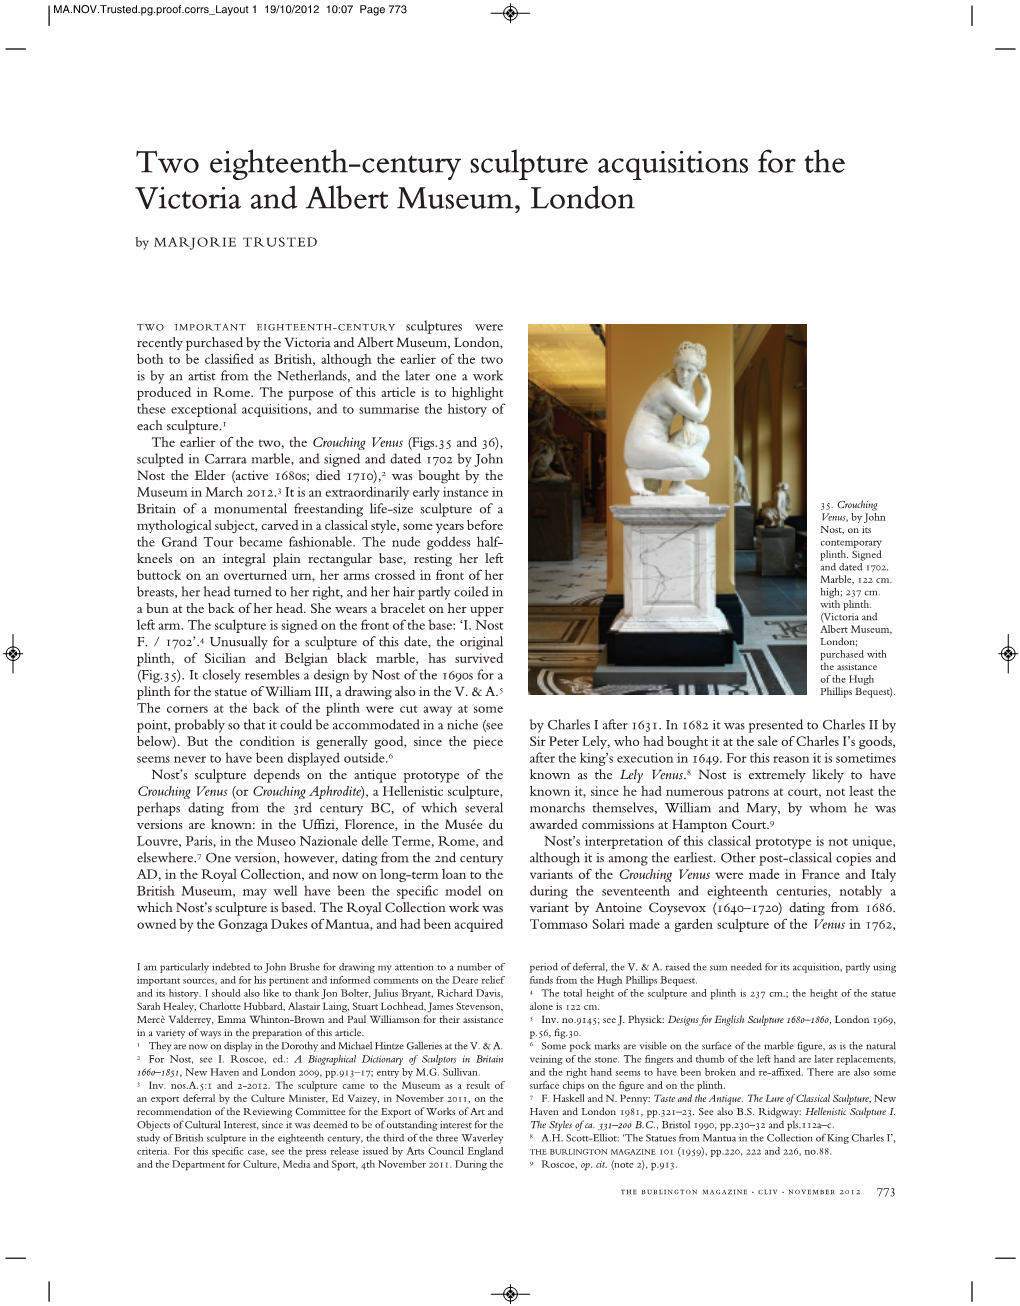 Two Eighteenth-Century Sculpture Acquisitions for the Victoria and Albert Museum, London